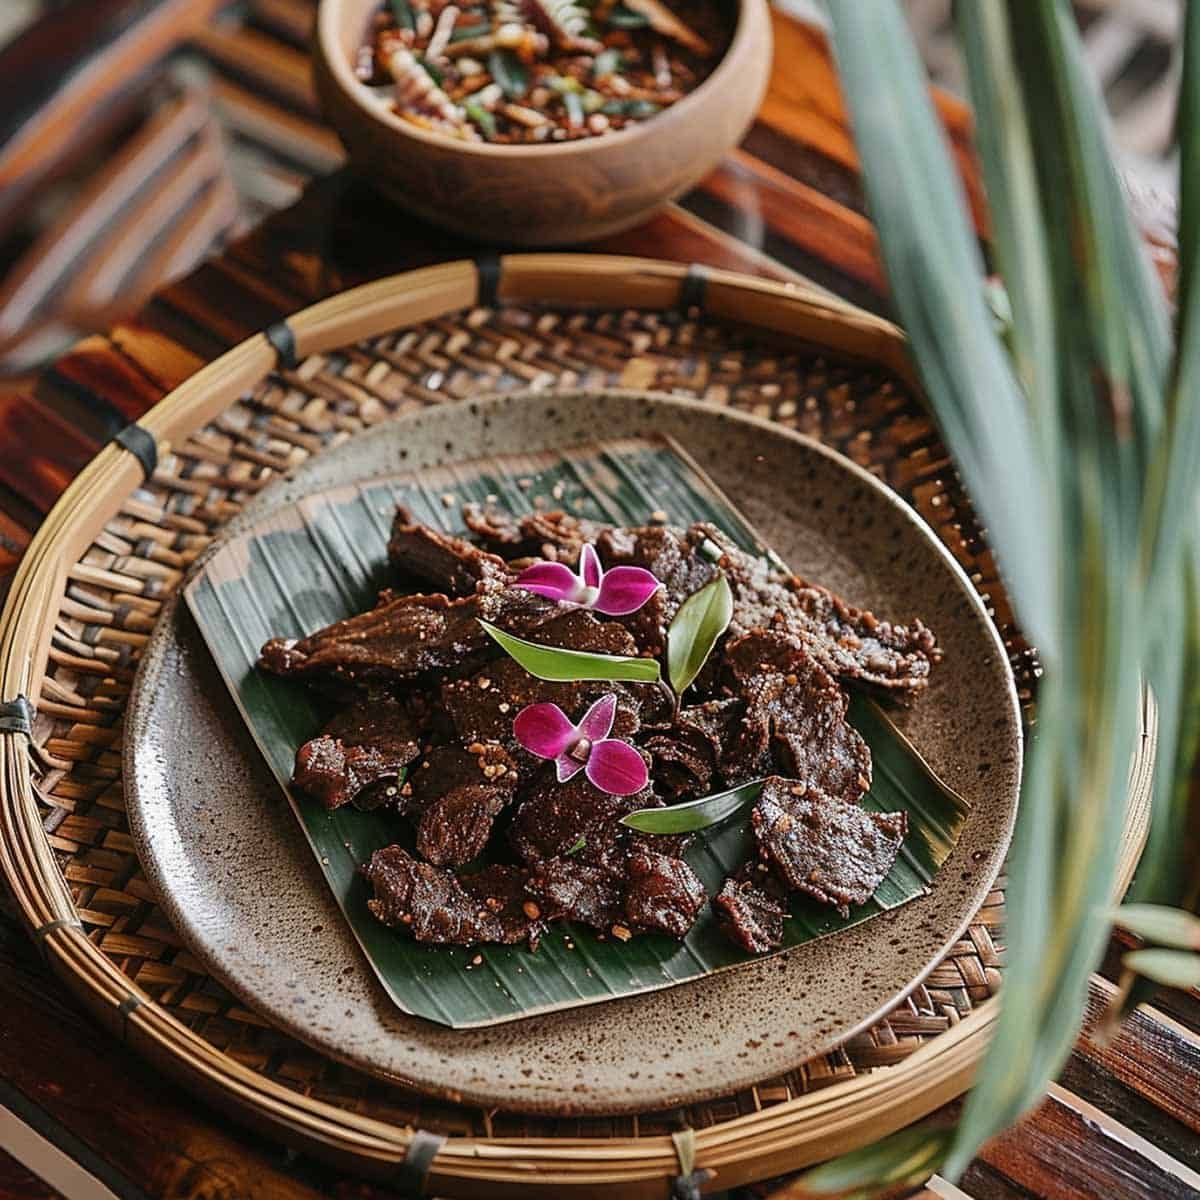 Thai Beef Jerky on a bamboo tray, garnished with a purple flower, highlighting the traditional presentation and vibrant garnish